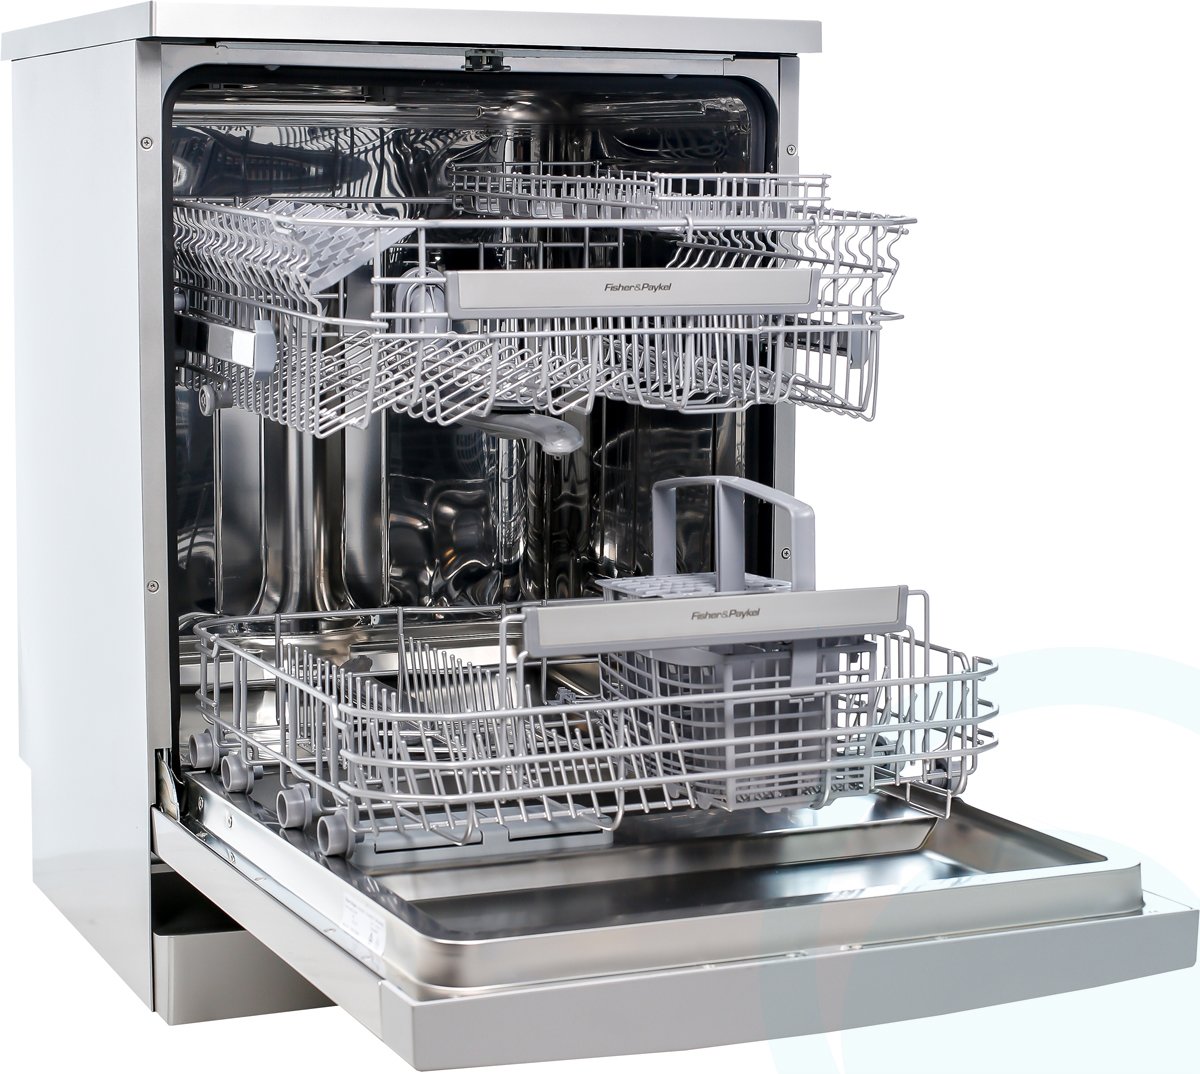 fisher and paykel dishwasher dw60fc4x1